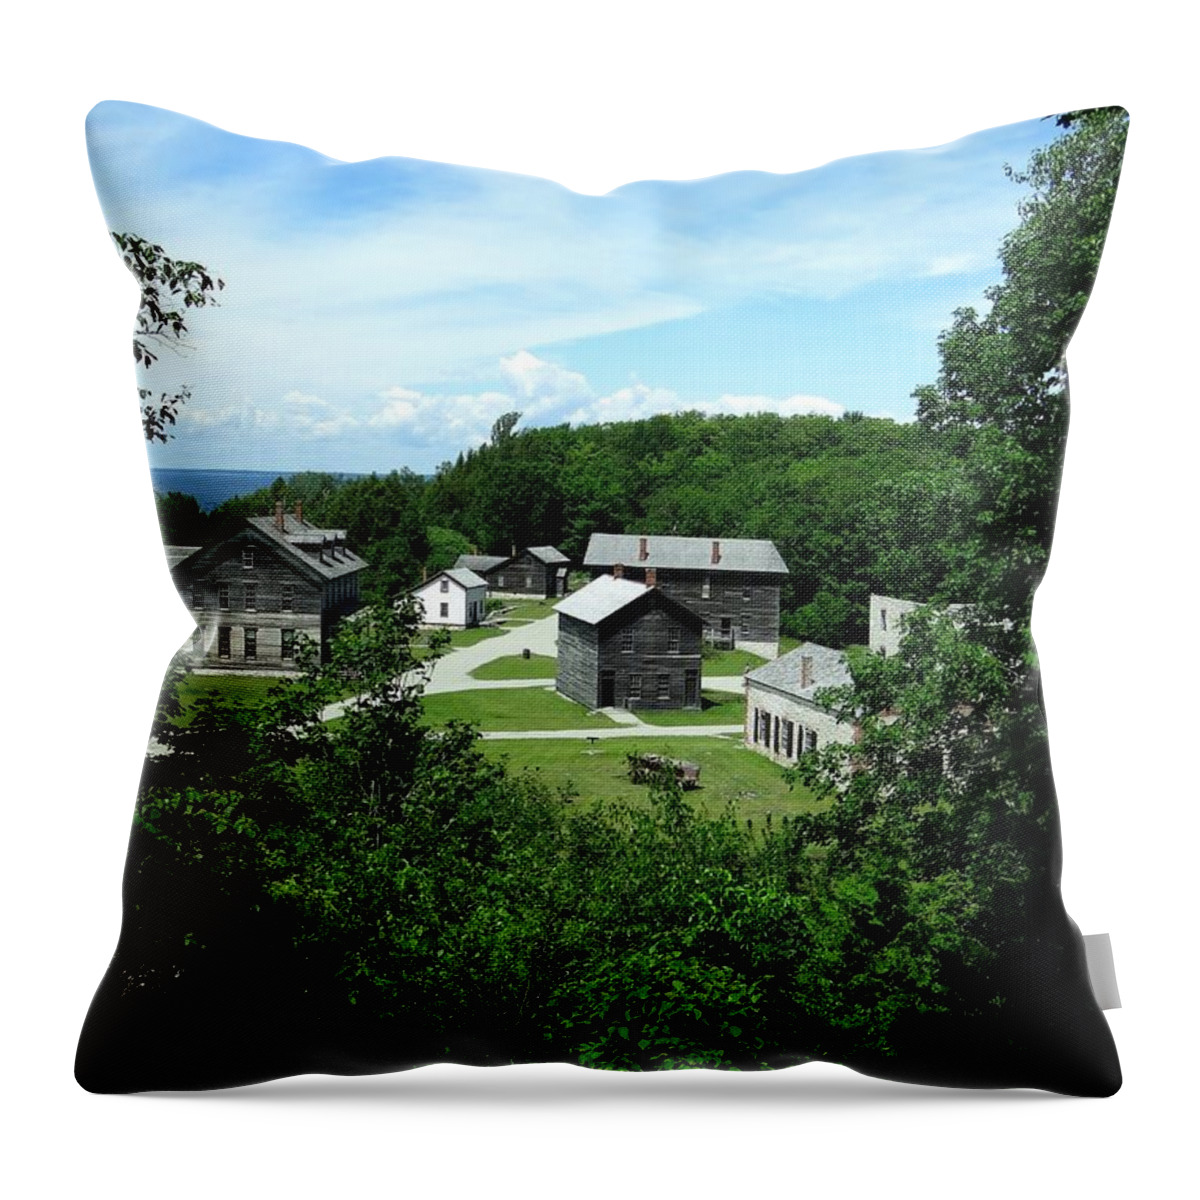 Fayette Throw Pillow featuring the photograph Fayette Historic State Park by Keith Stokes